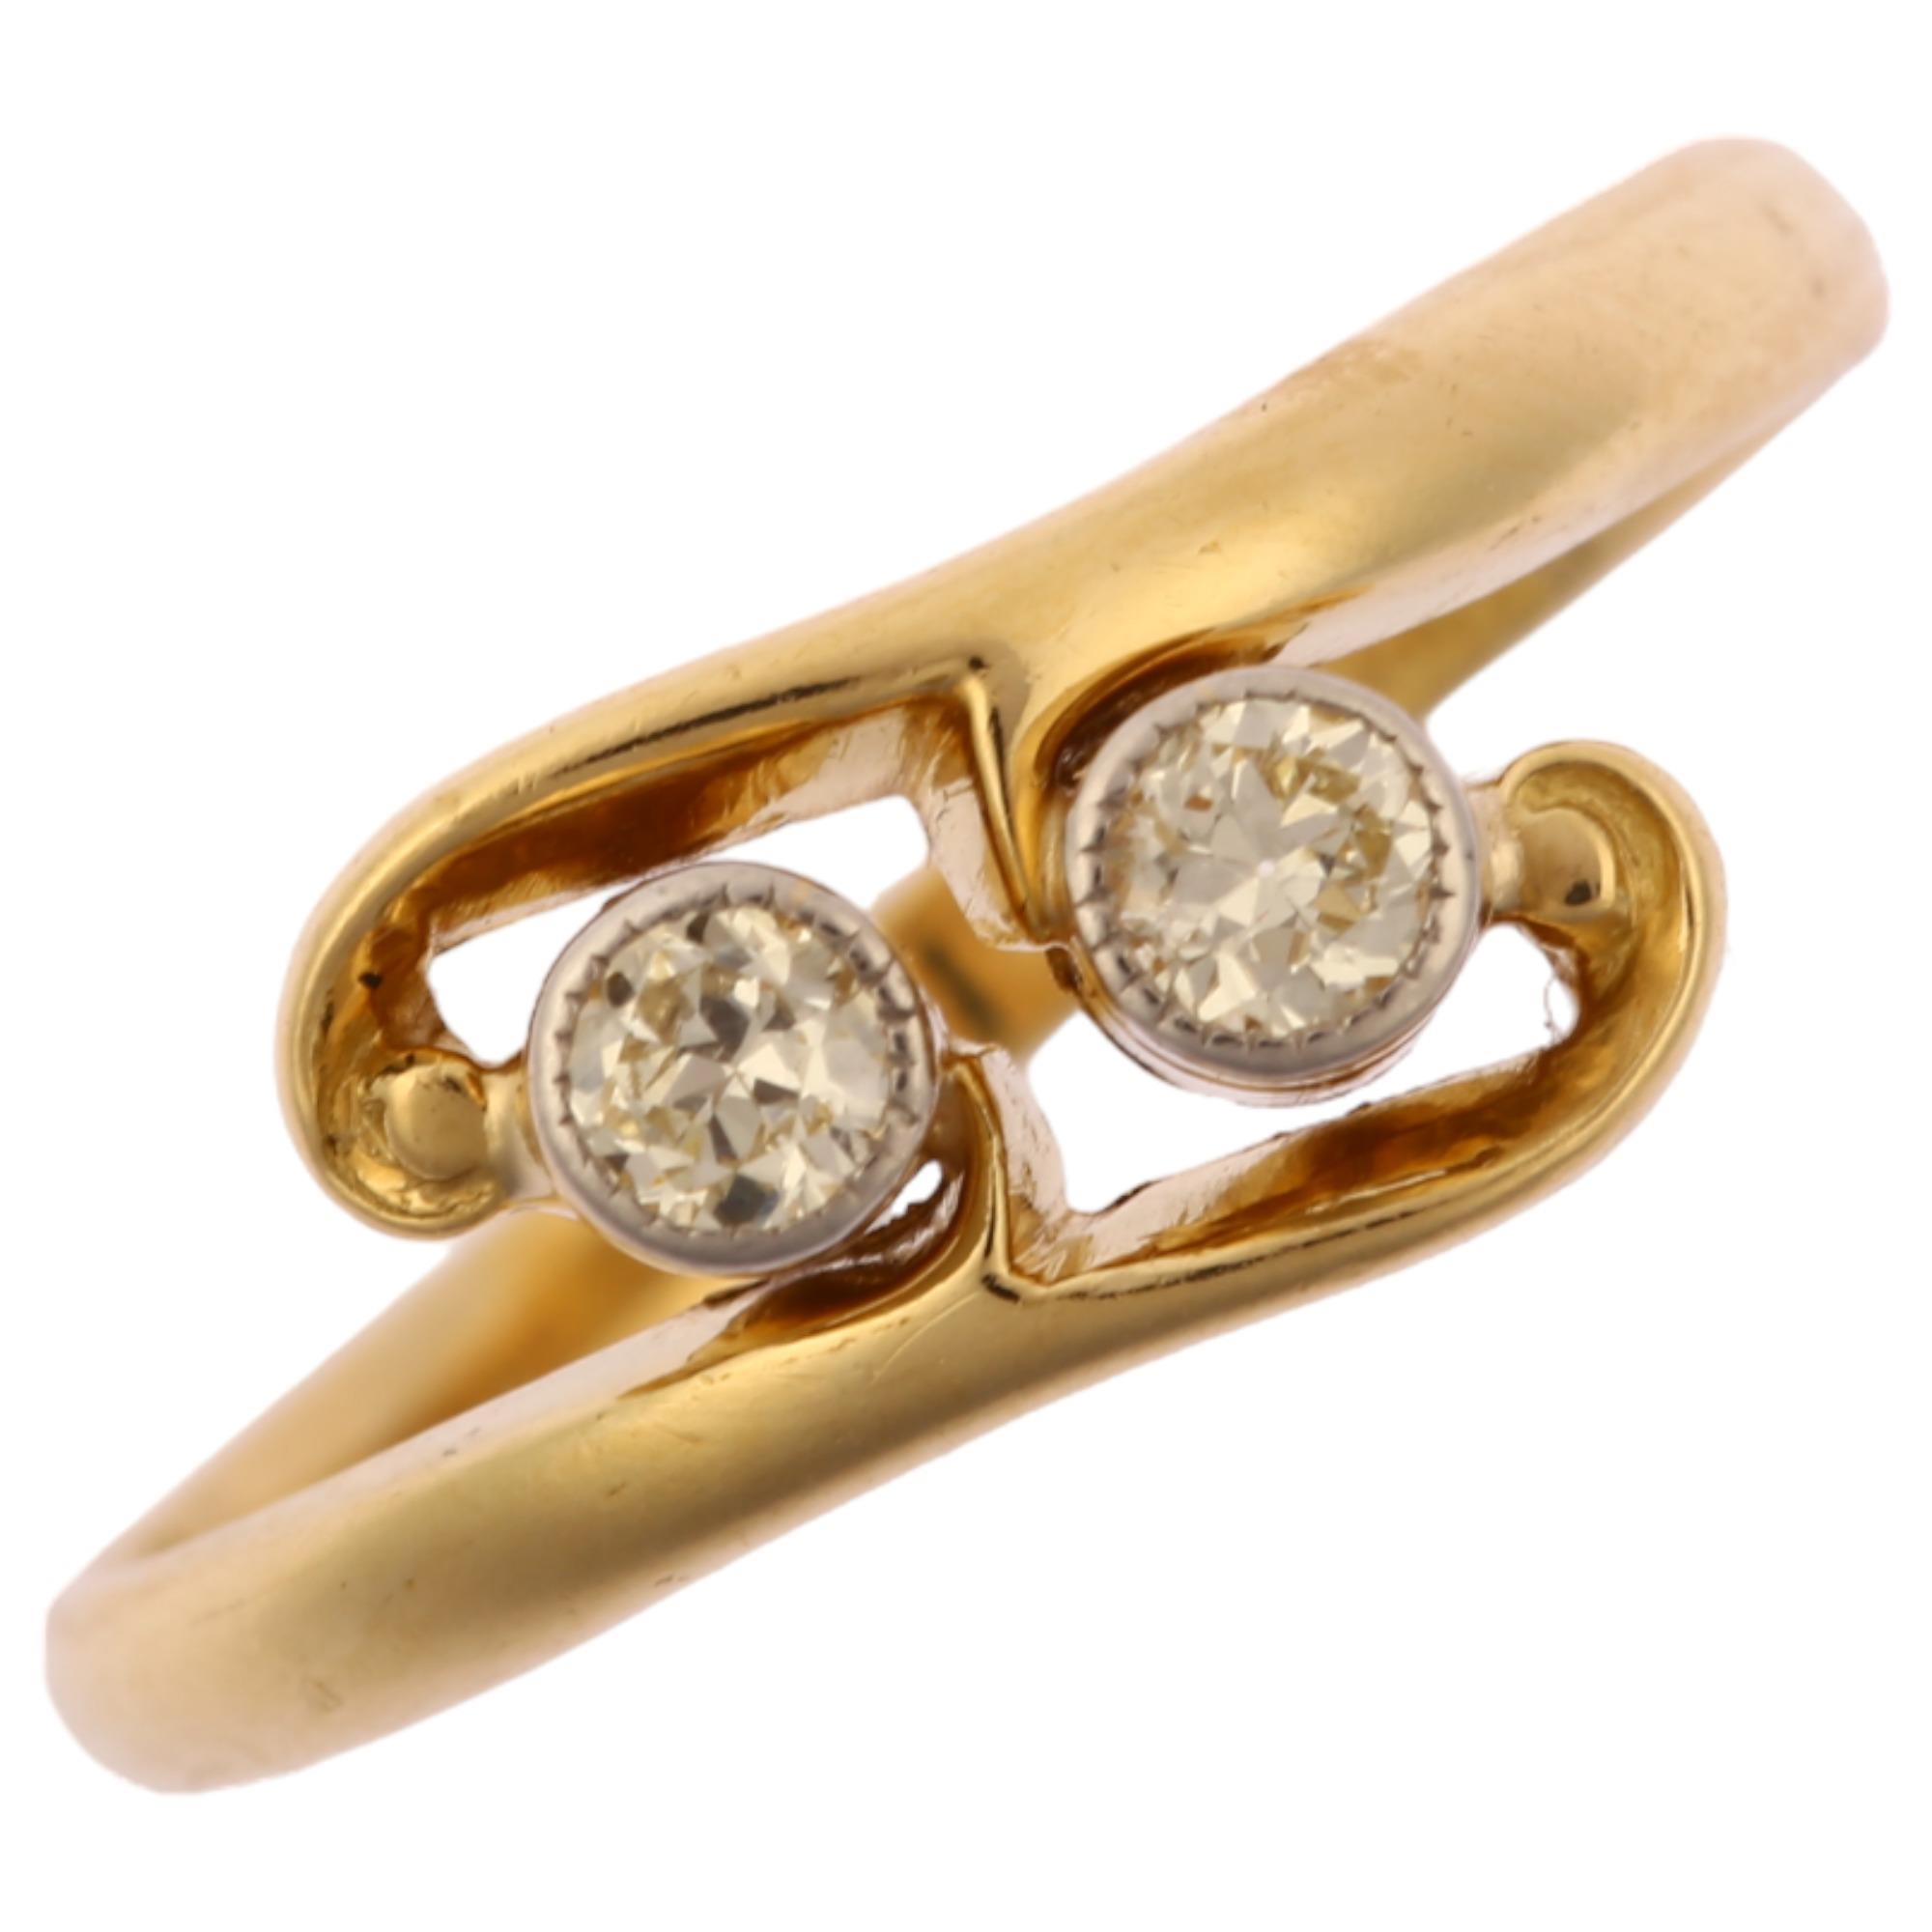 An early 20th century 18ct gold two stone diamond crossover ring, platinum-topped set with modern